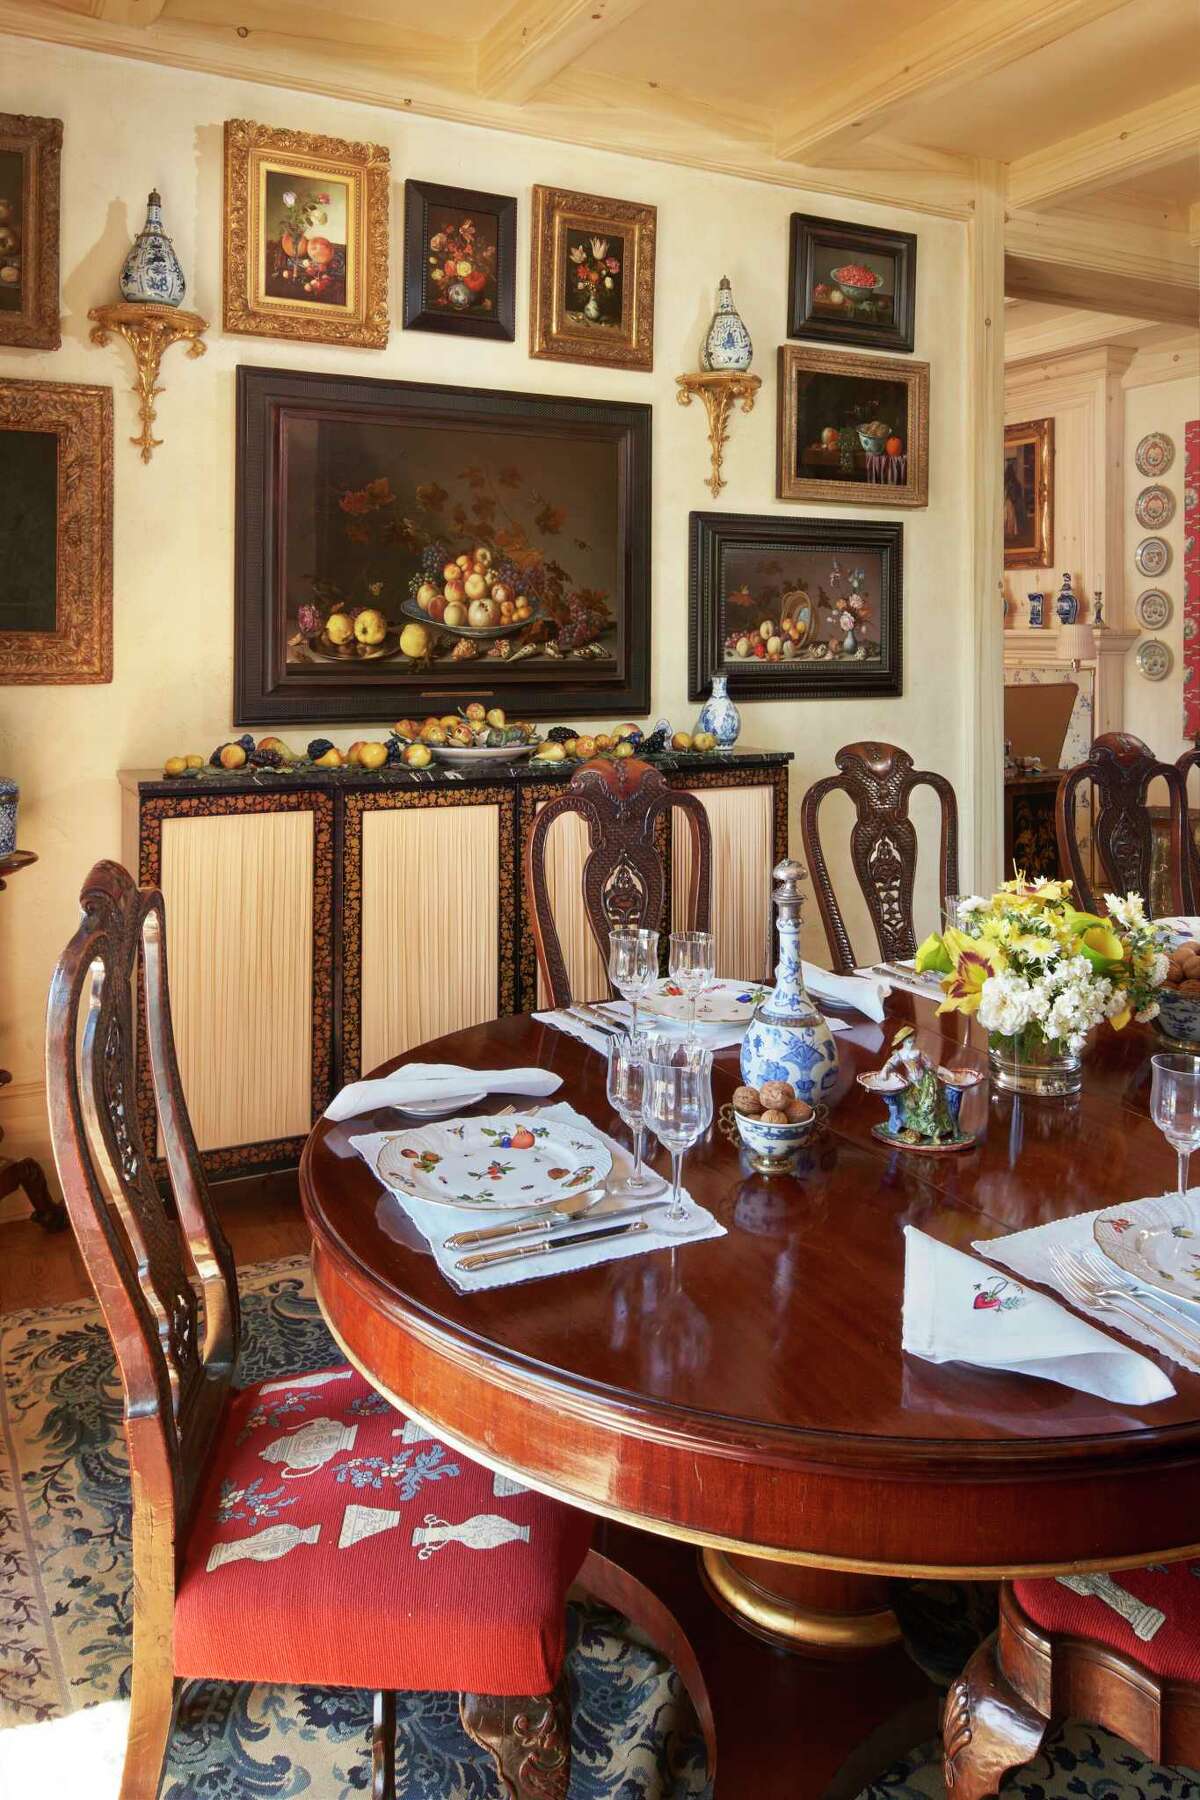 Dining room at Wheatland, the Yuba County family home of Ann Getty.  Still life paintings of fruit including the central work by Balthasar van der Ast are displayed on the walls along with Dutch porcelain Delft fruit on the sideboard below. 